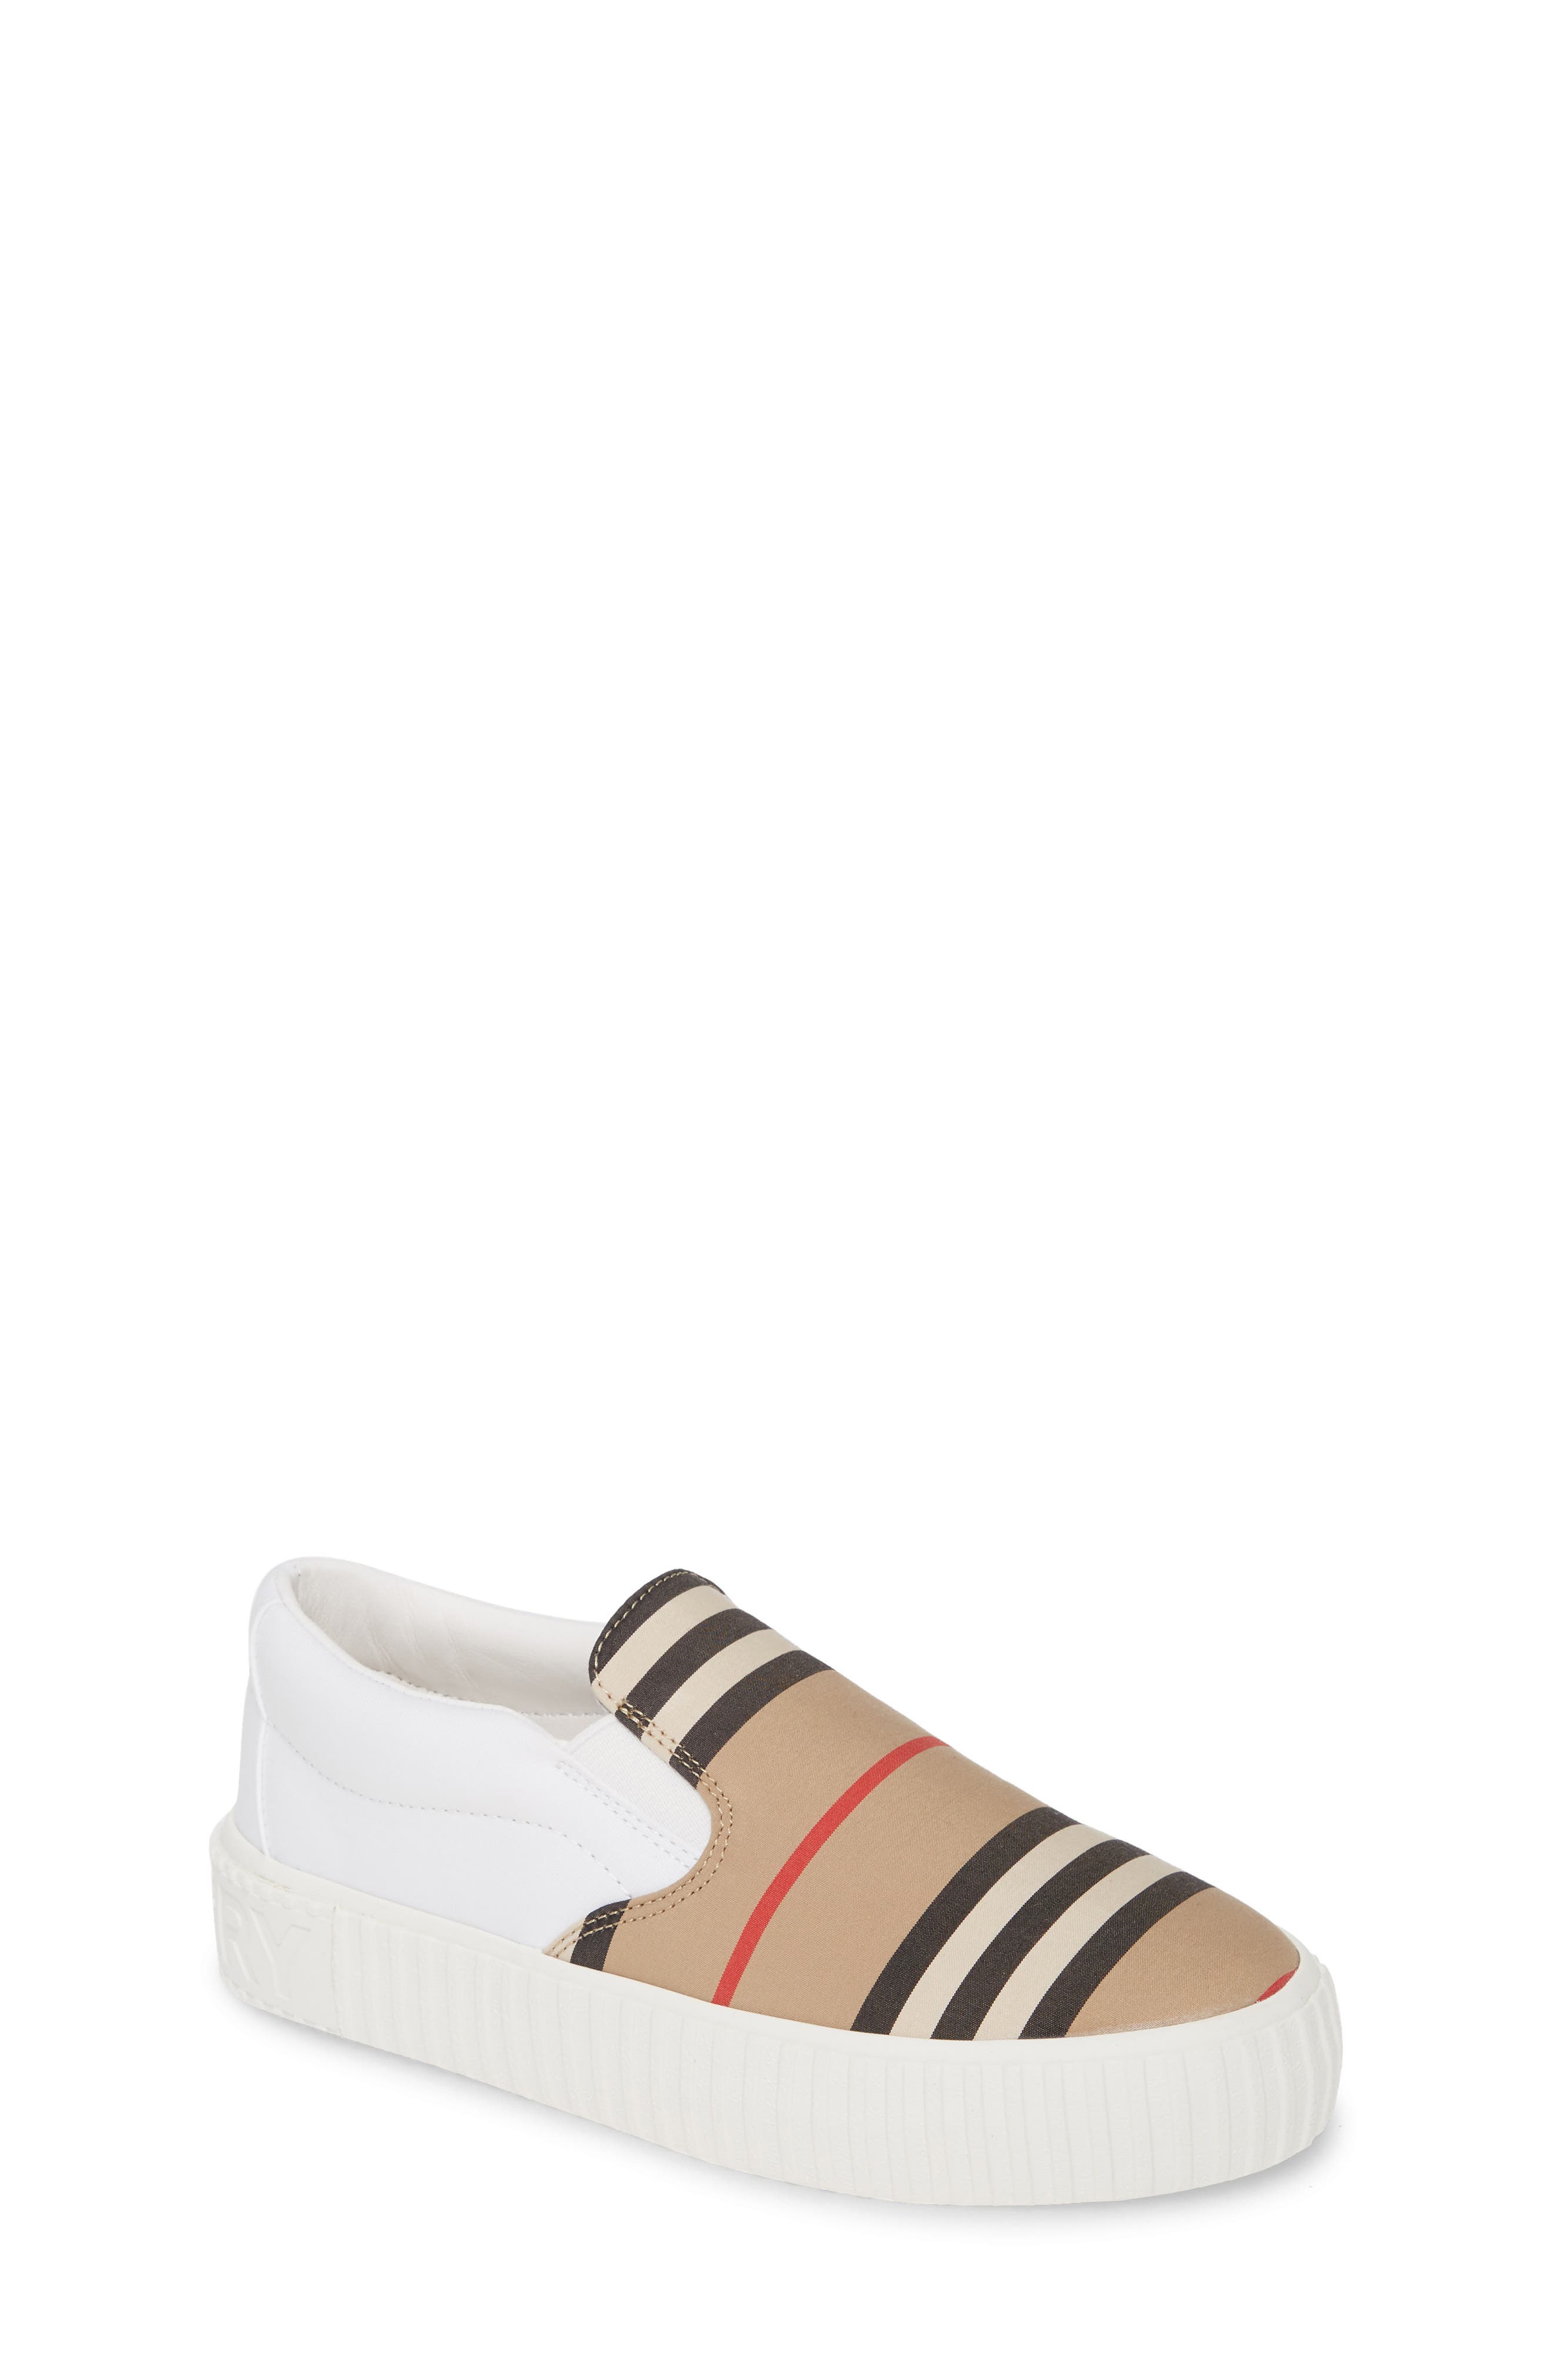 burberry shoes for girls